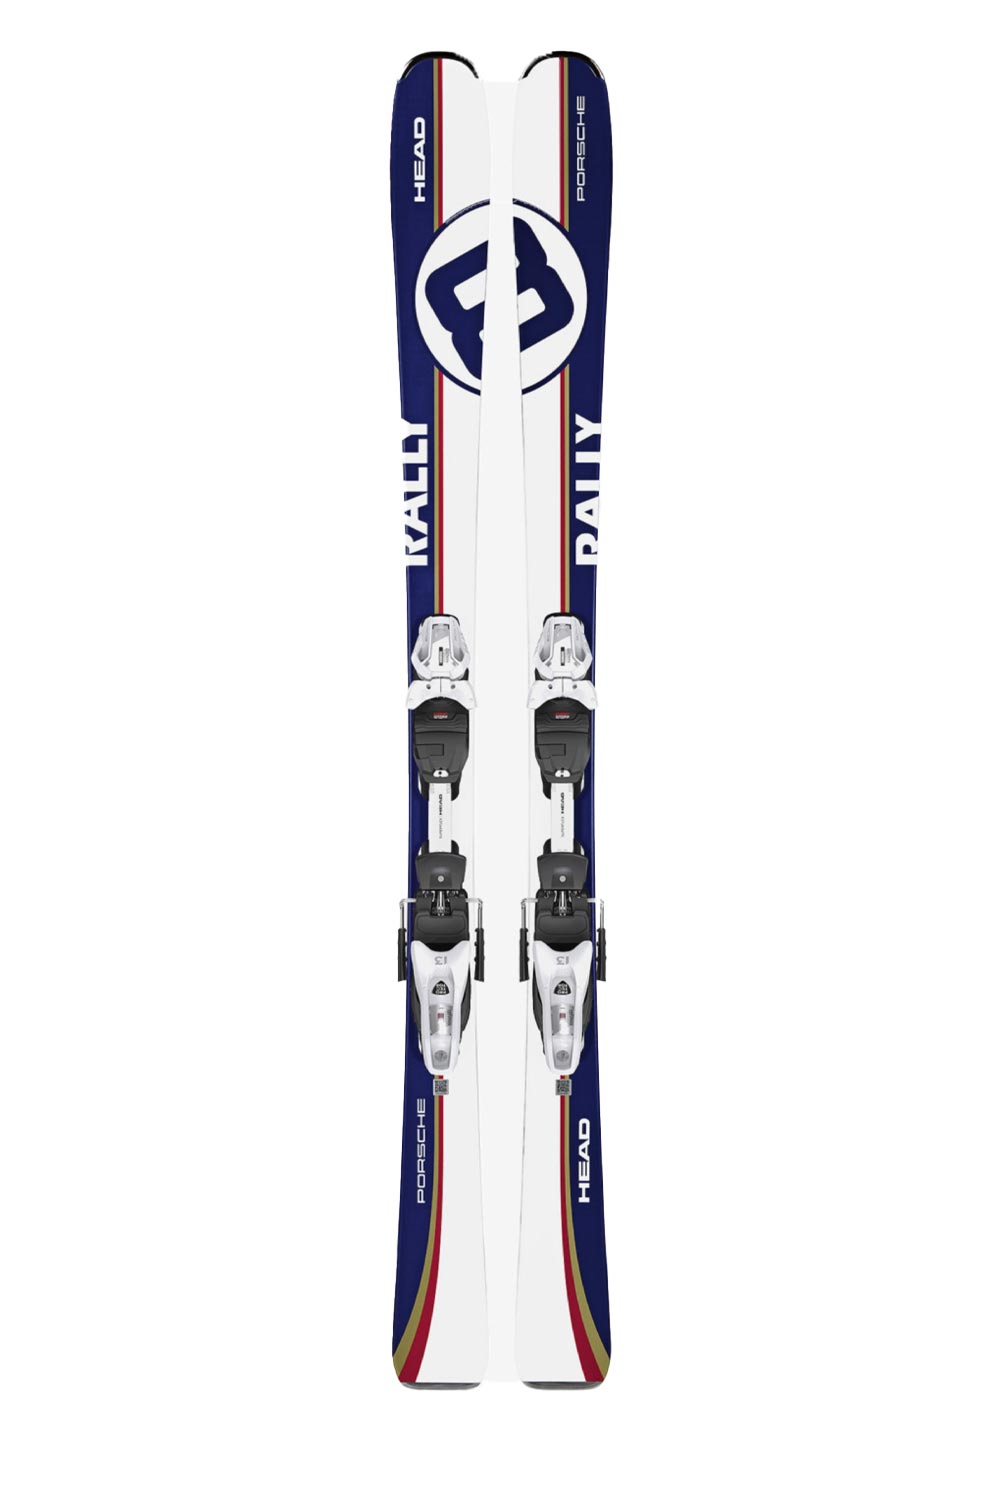 Head Porsche downhill skis, red, white and blue rally graphic